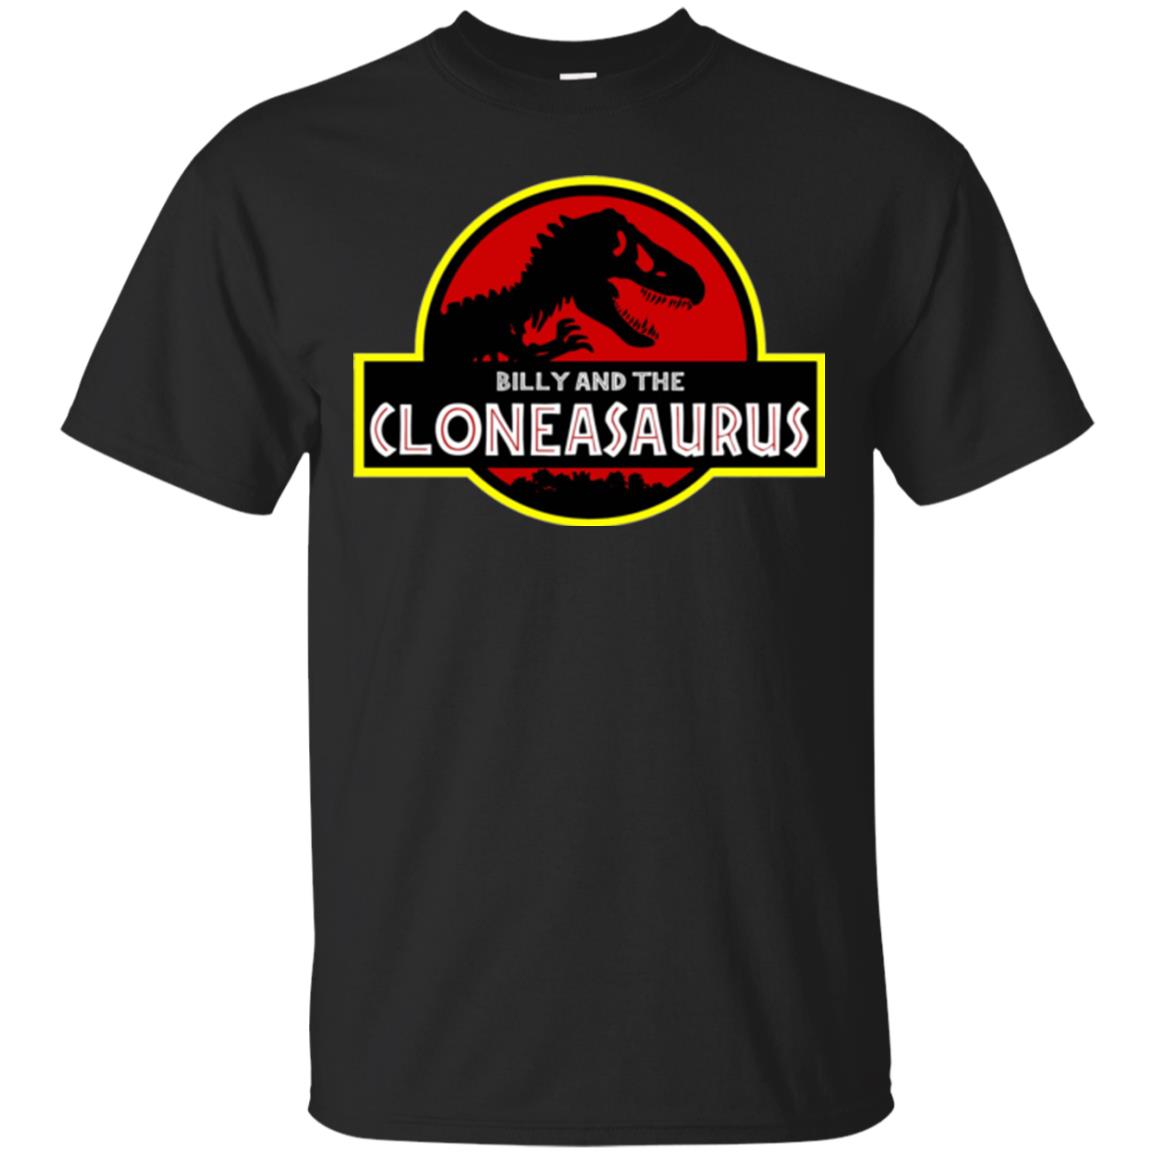 billy and the cloneasaurus shirt - black